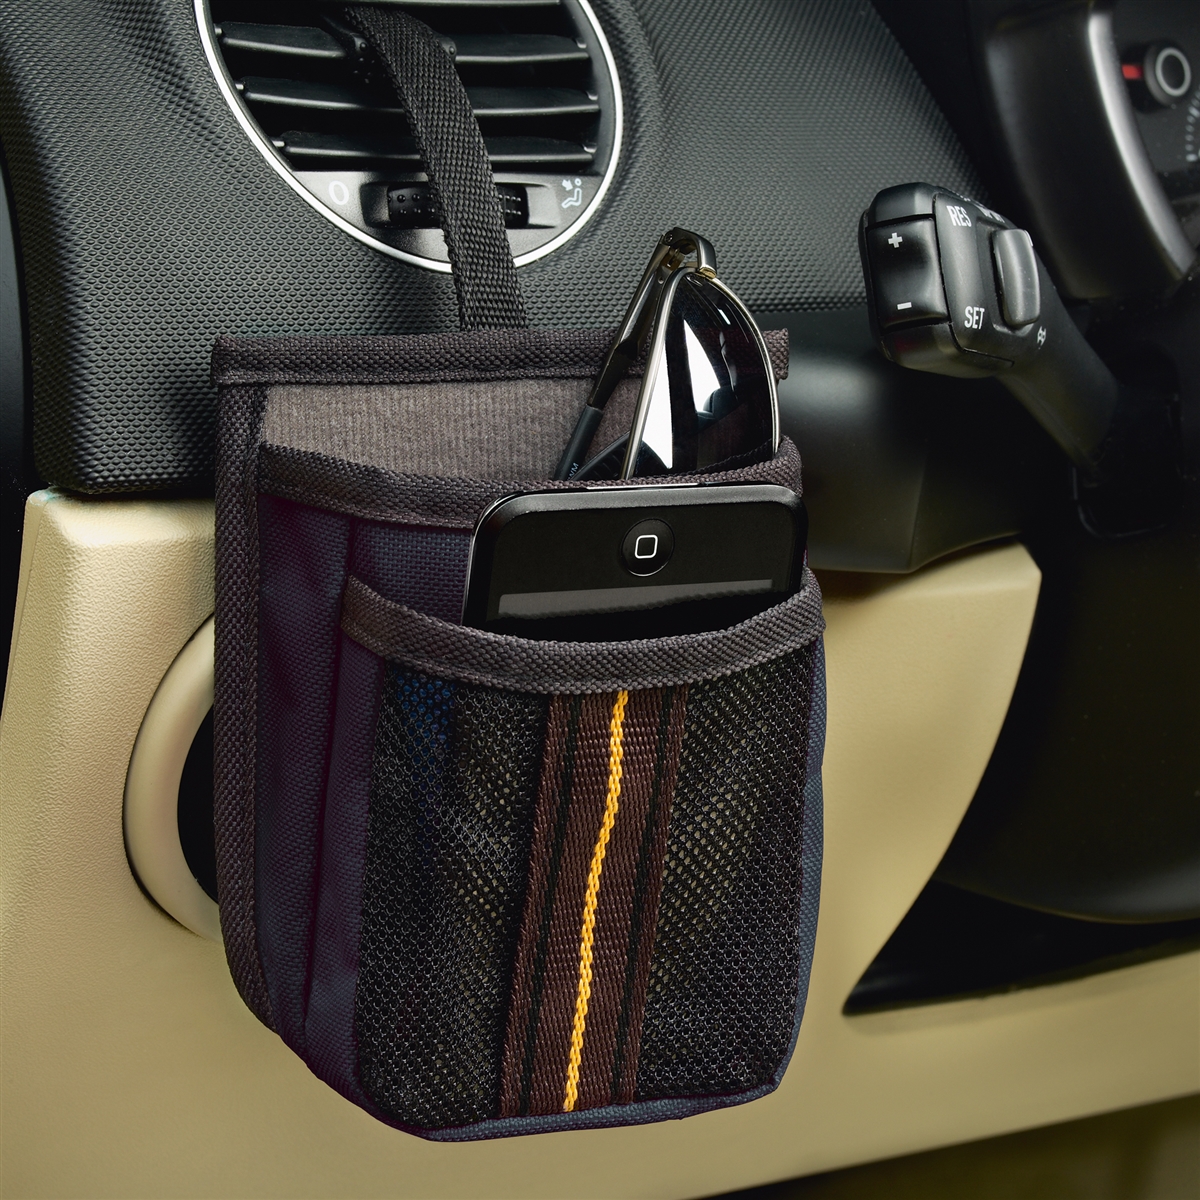 Car Cache Purse Holder – Coolestuff To Buy